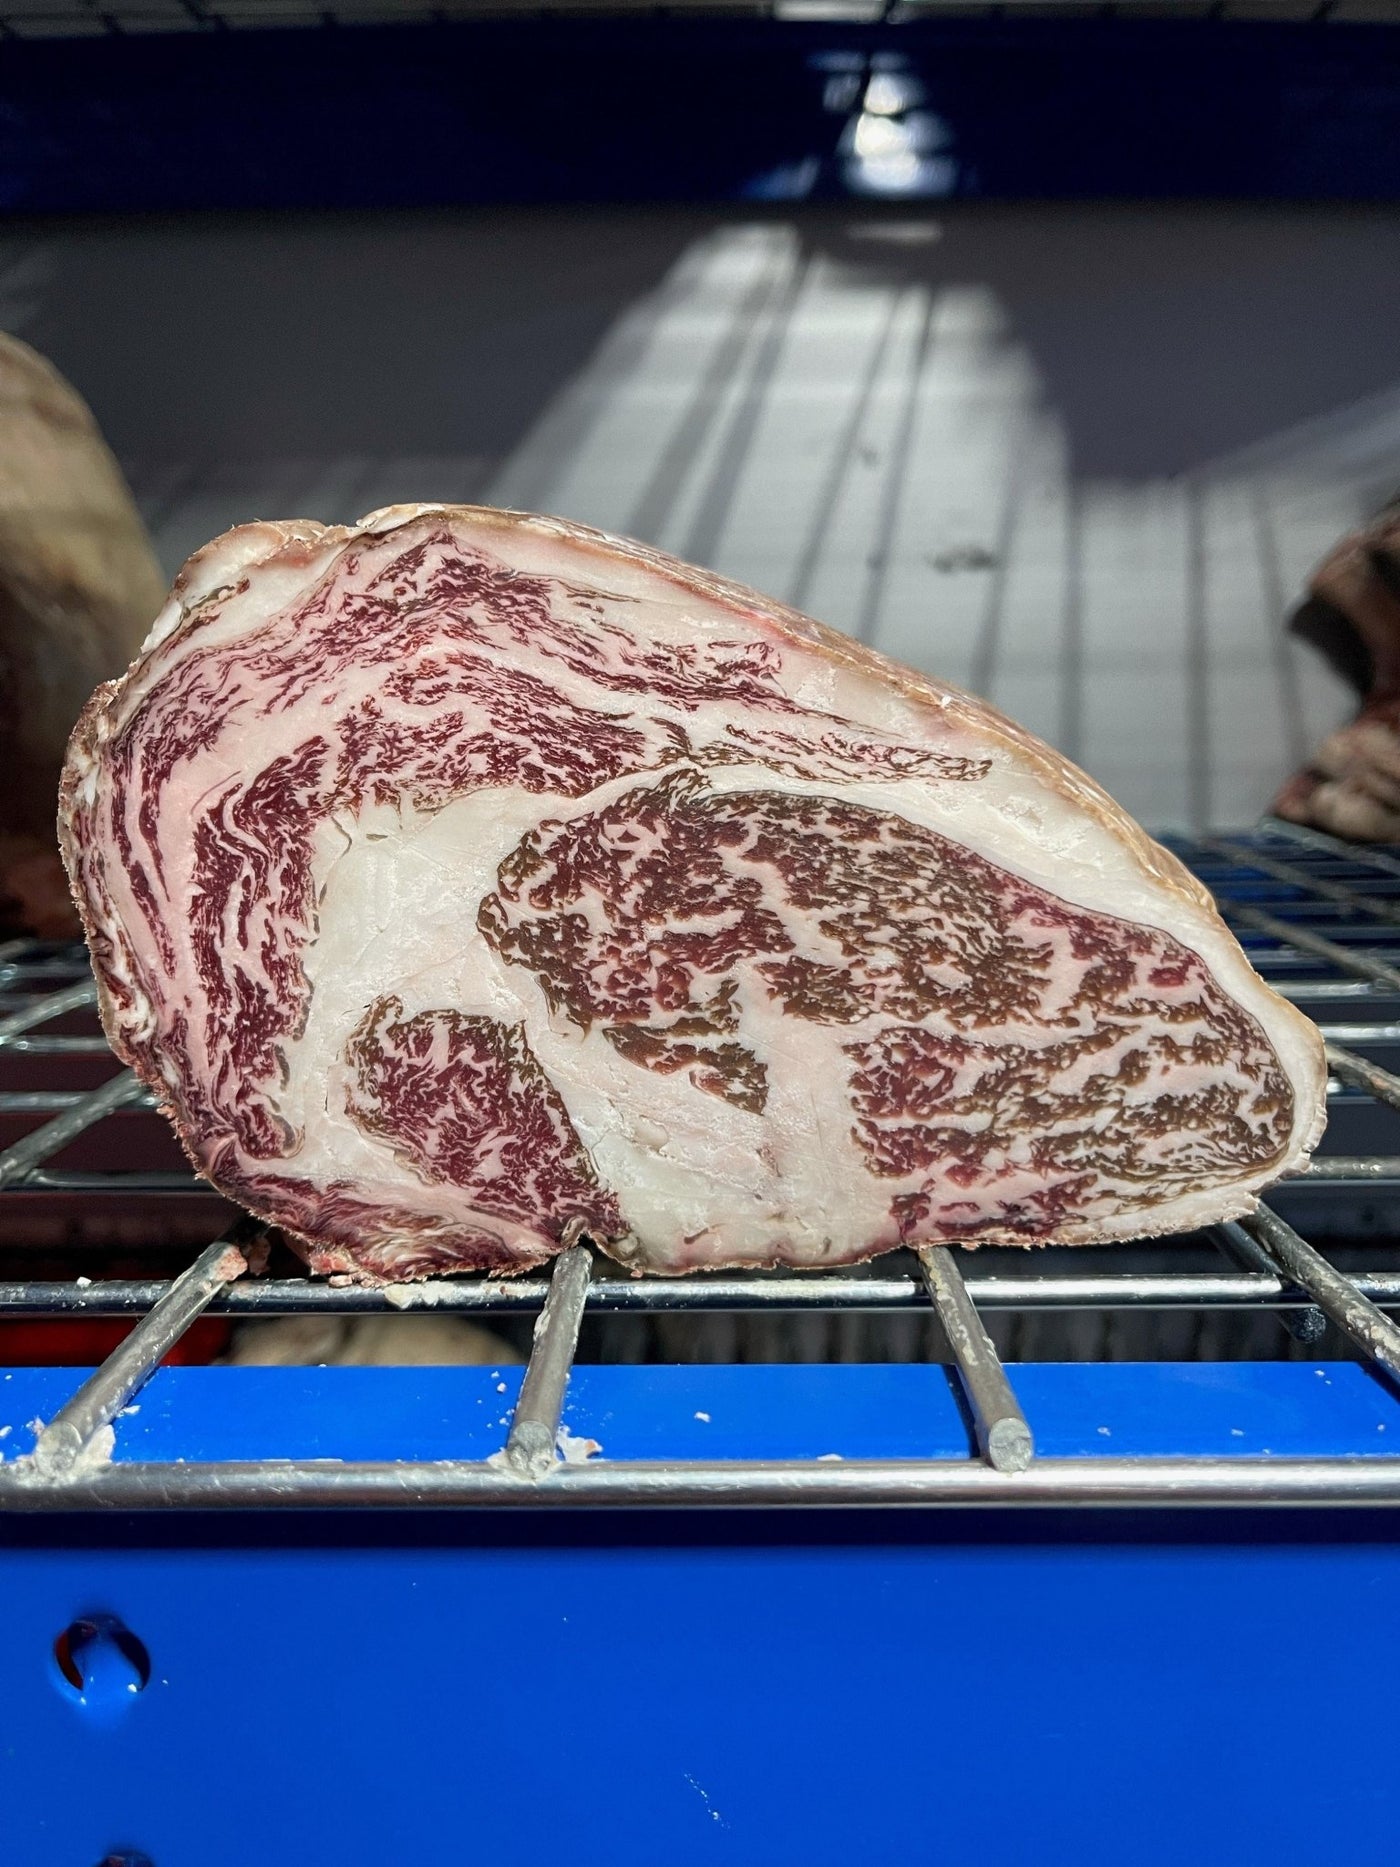 45 Day Aged Wild River Wagyu Ribeye BMS 8+ - Thomas Joseph Butchery - Ethical Dry-Aged Meat The Best Steak UK Thomas Joseph Butchery